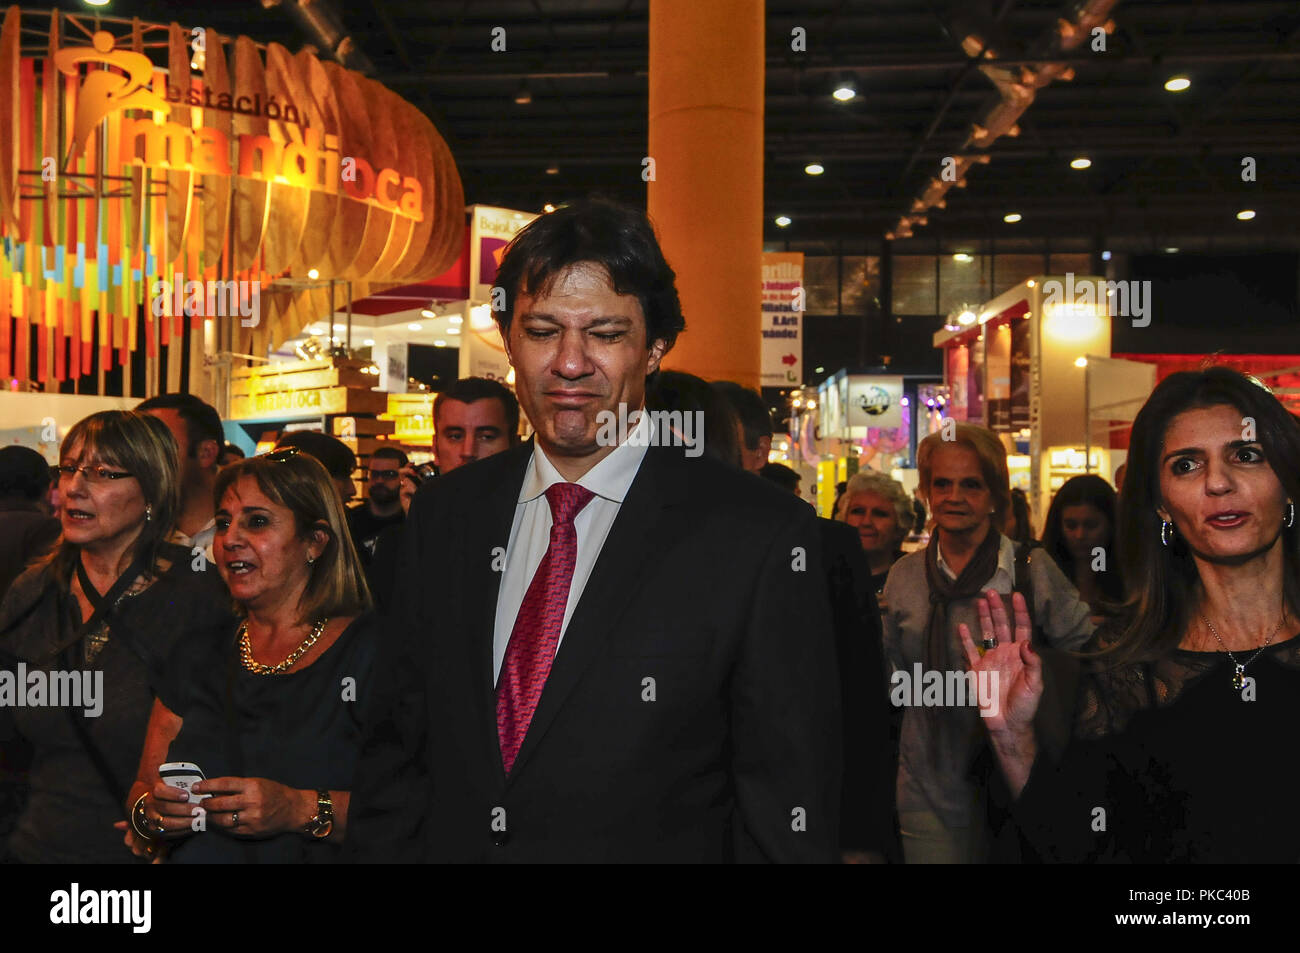 Firmat, Santa Fe, Argentina. 24th Apr, 2014. Fernando Haddad, at the time Mayor of Sao Paulo, with his wife Ana Estela during a visit to Buenos Aires' Book Fair. Haddad has been appointed to replace Inazio Lula da Silva as the PT (Workers Party) Presidential candidate for the upcoming elections. Credit: Patricio Murphy/ZUMA Wire/Alamy Live News Stock Photo